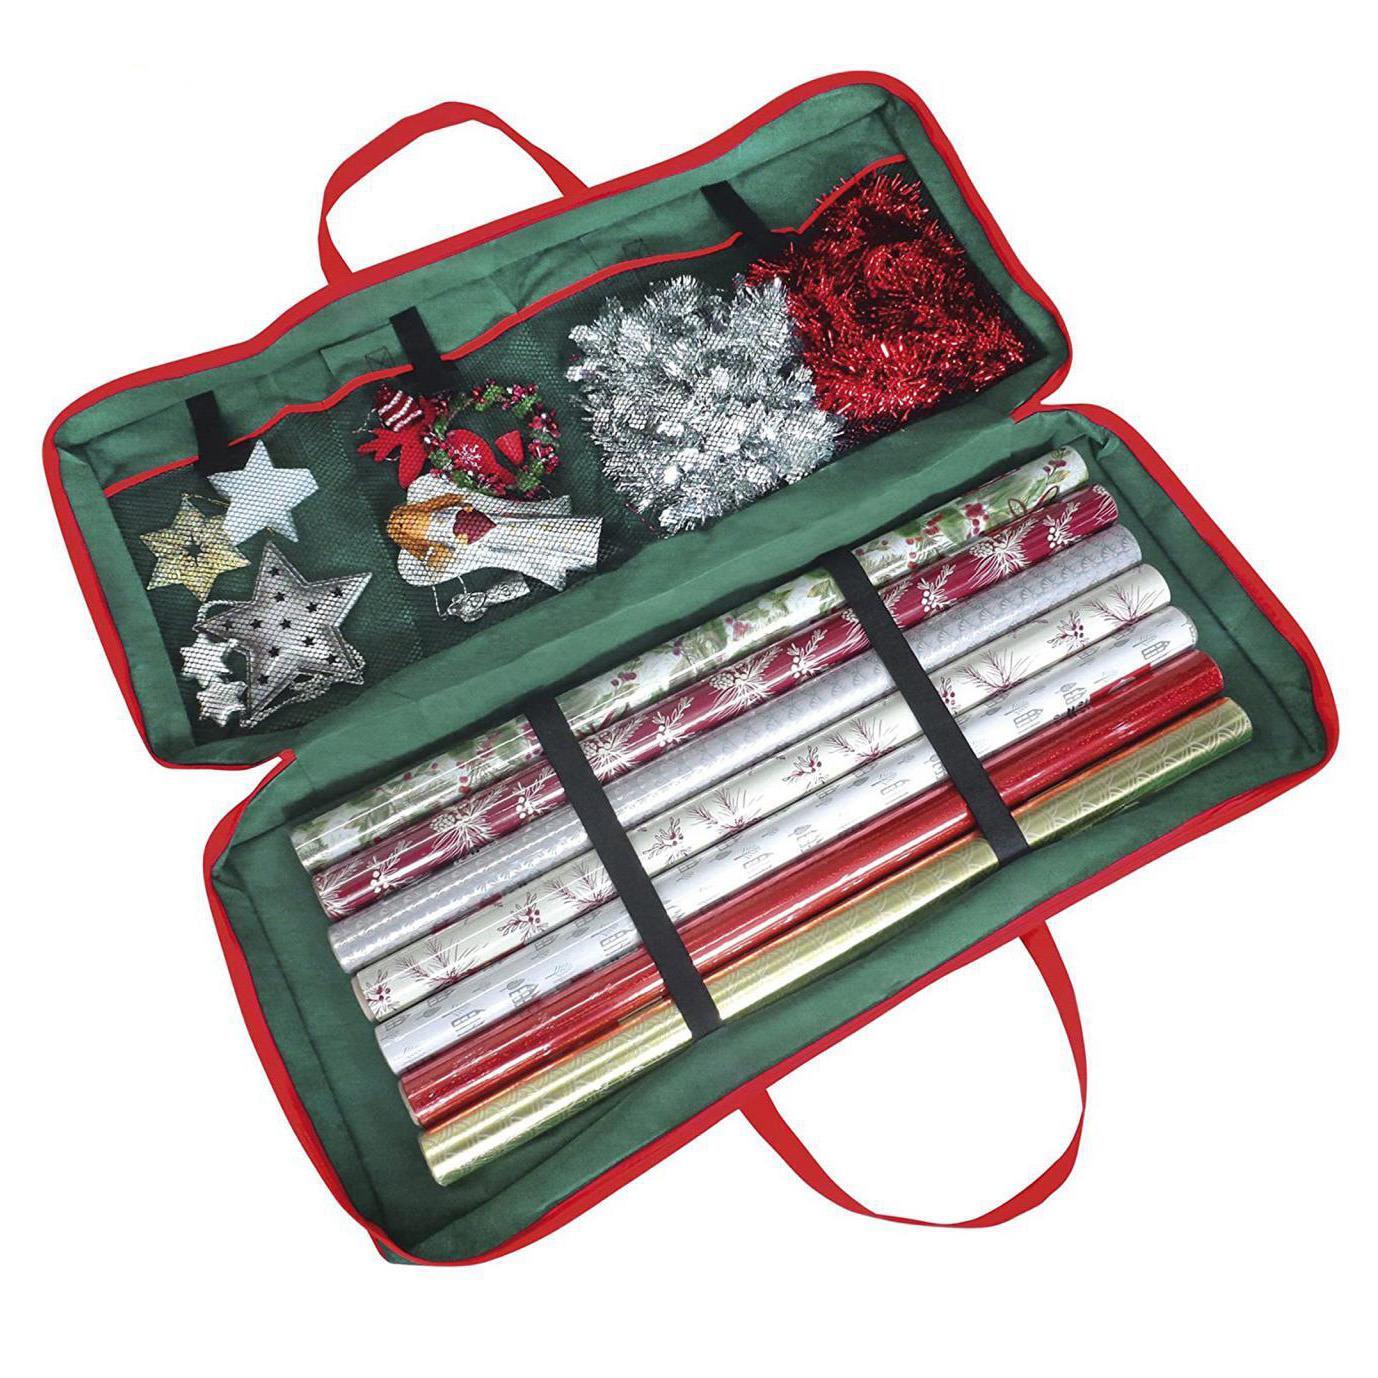 Wrap And Decoration Storage Bag by The Magic Toy Shop - UKBuyZone